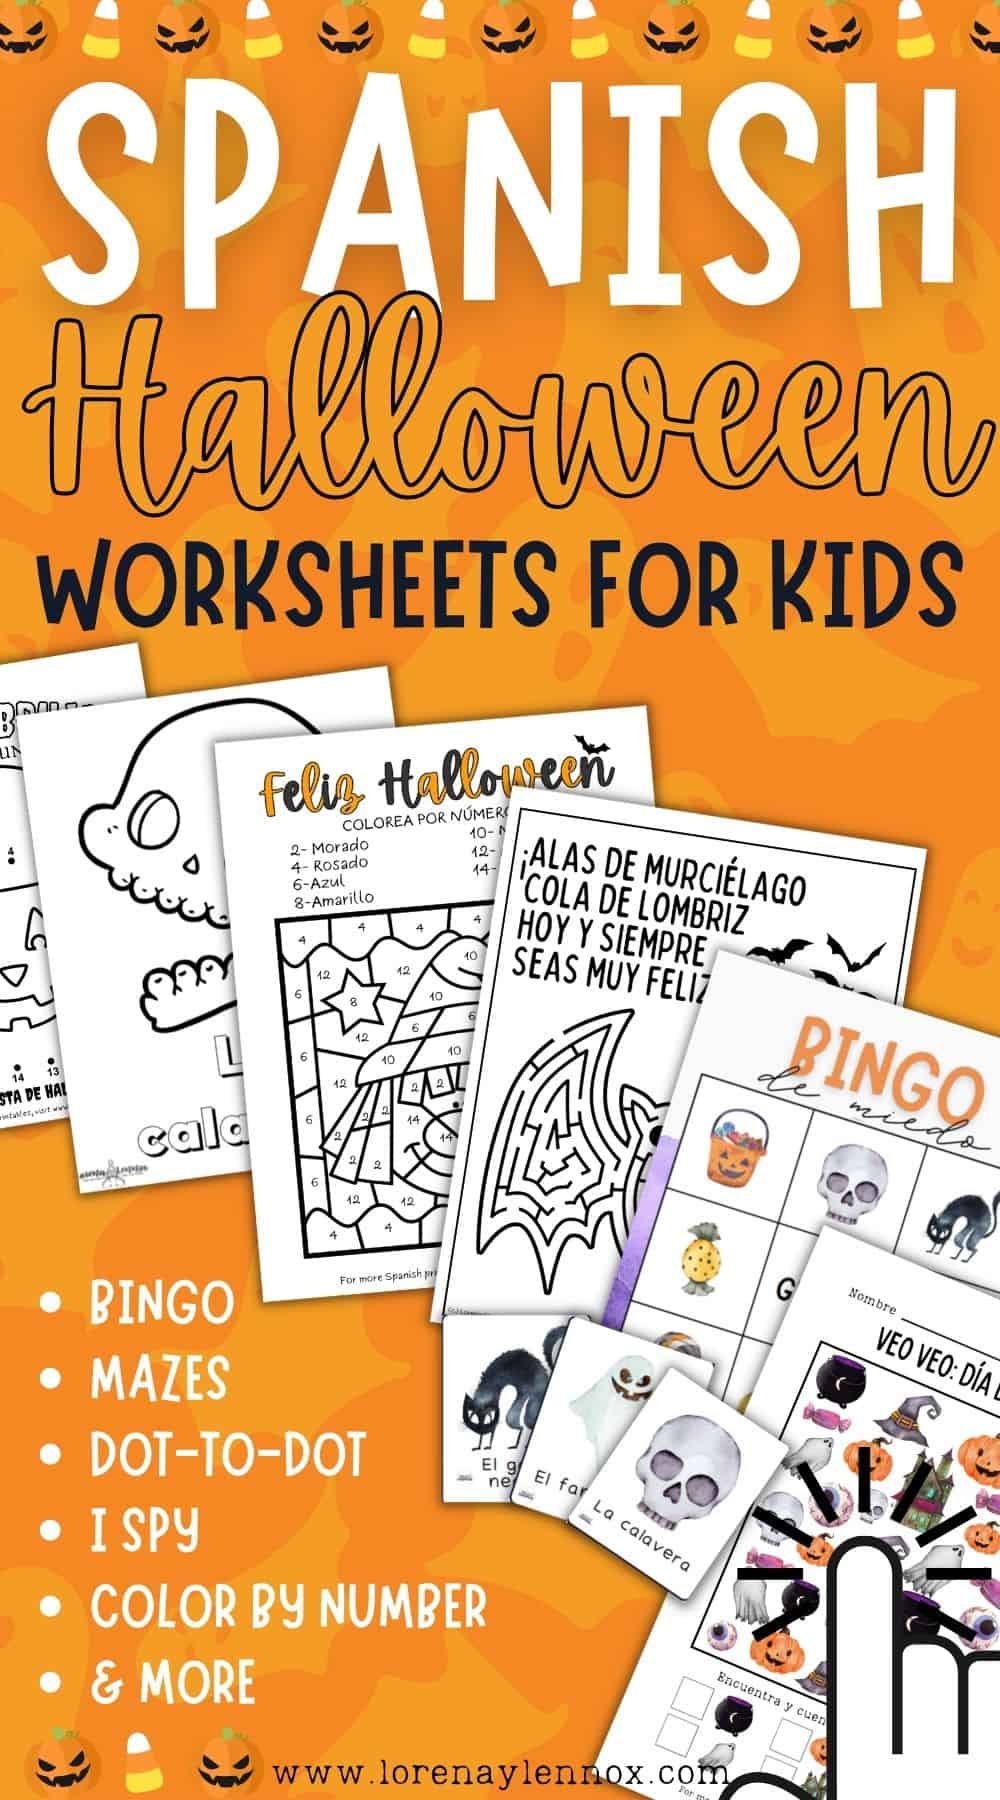 "Infuse the Halloween spirit into language learning with our collection of 13+ Spanish Halloween worksheets and resources. Perfect for educators and parents, these printables bring bilingual fun to the festive season. Engage young minds with captivating activities that encompass coloring, tracing, word games, and more. Explore the enchantment today! 🎃📚 #SpanishHalloweenWorksheets #BilingualLearning #HalloweenFun"